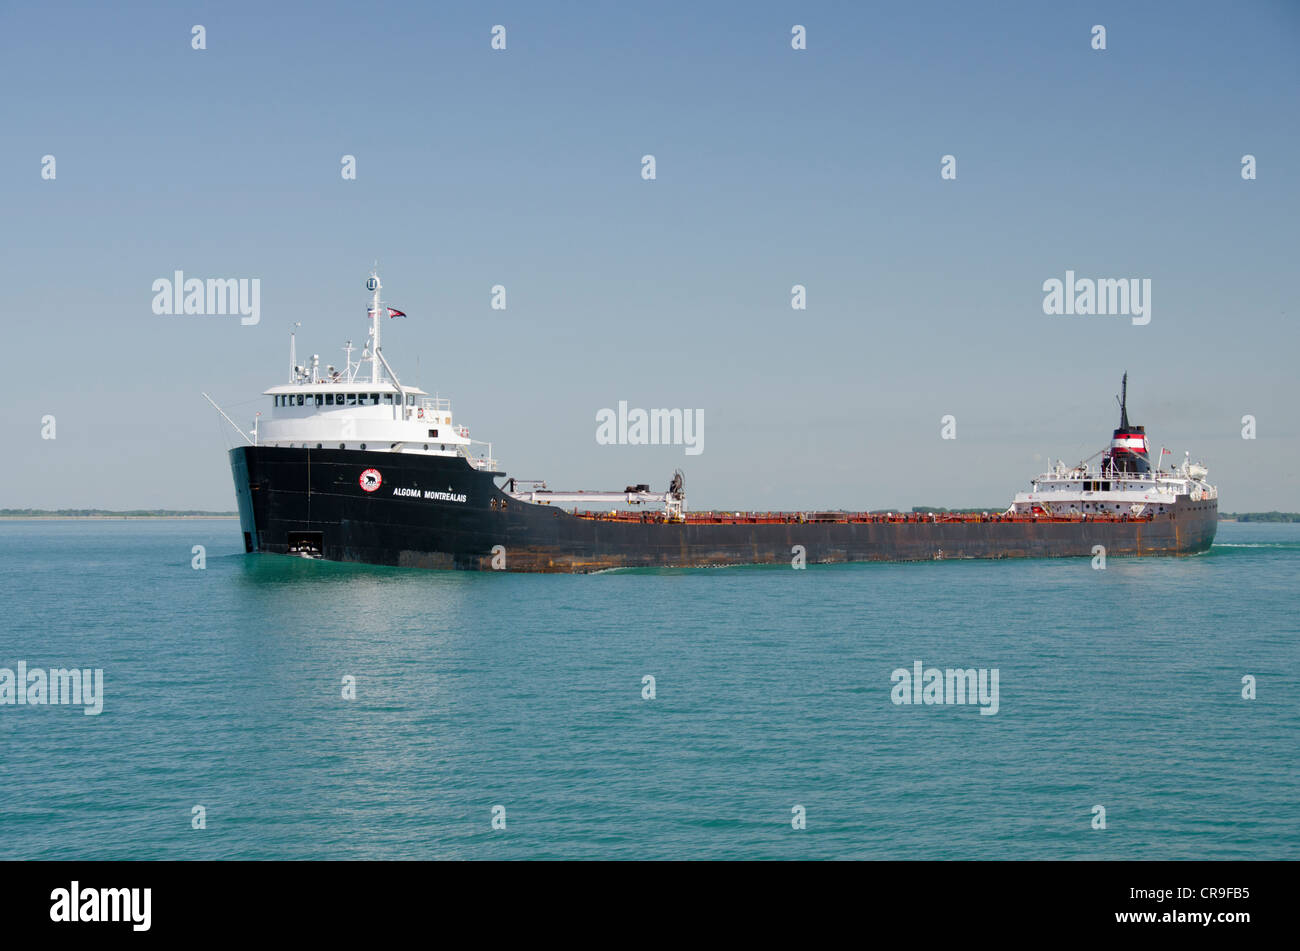 Michigan, Lake Erie, Detroit River near Wyandotte. Typical 'Laker' style cargo ship that sails in the Great Lakes. Stock Photo